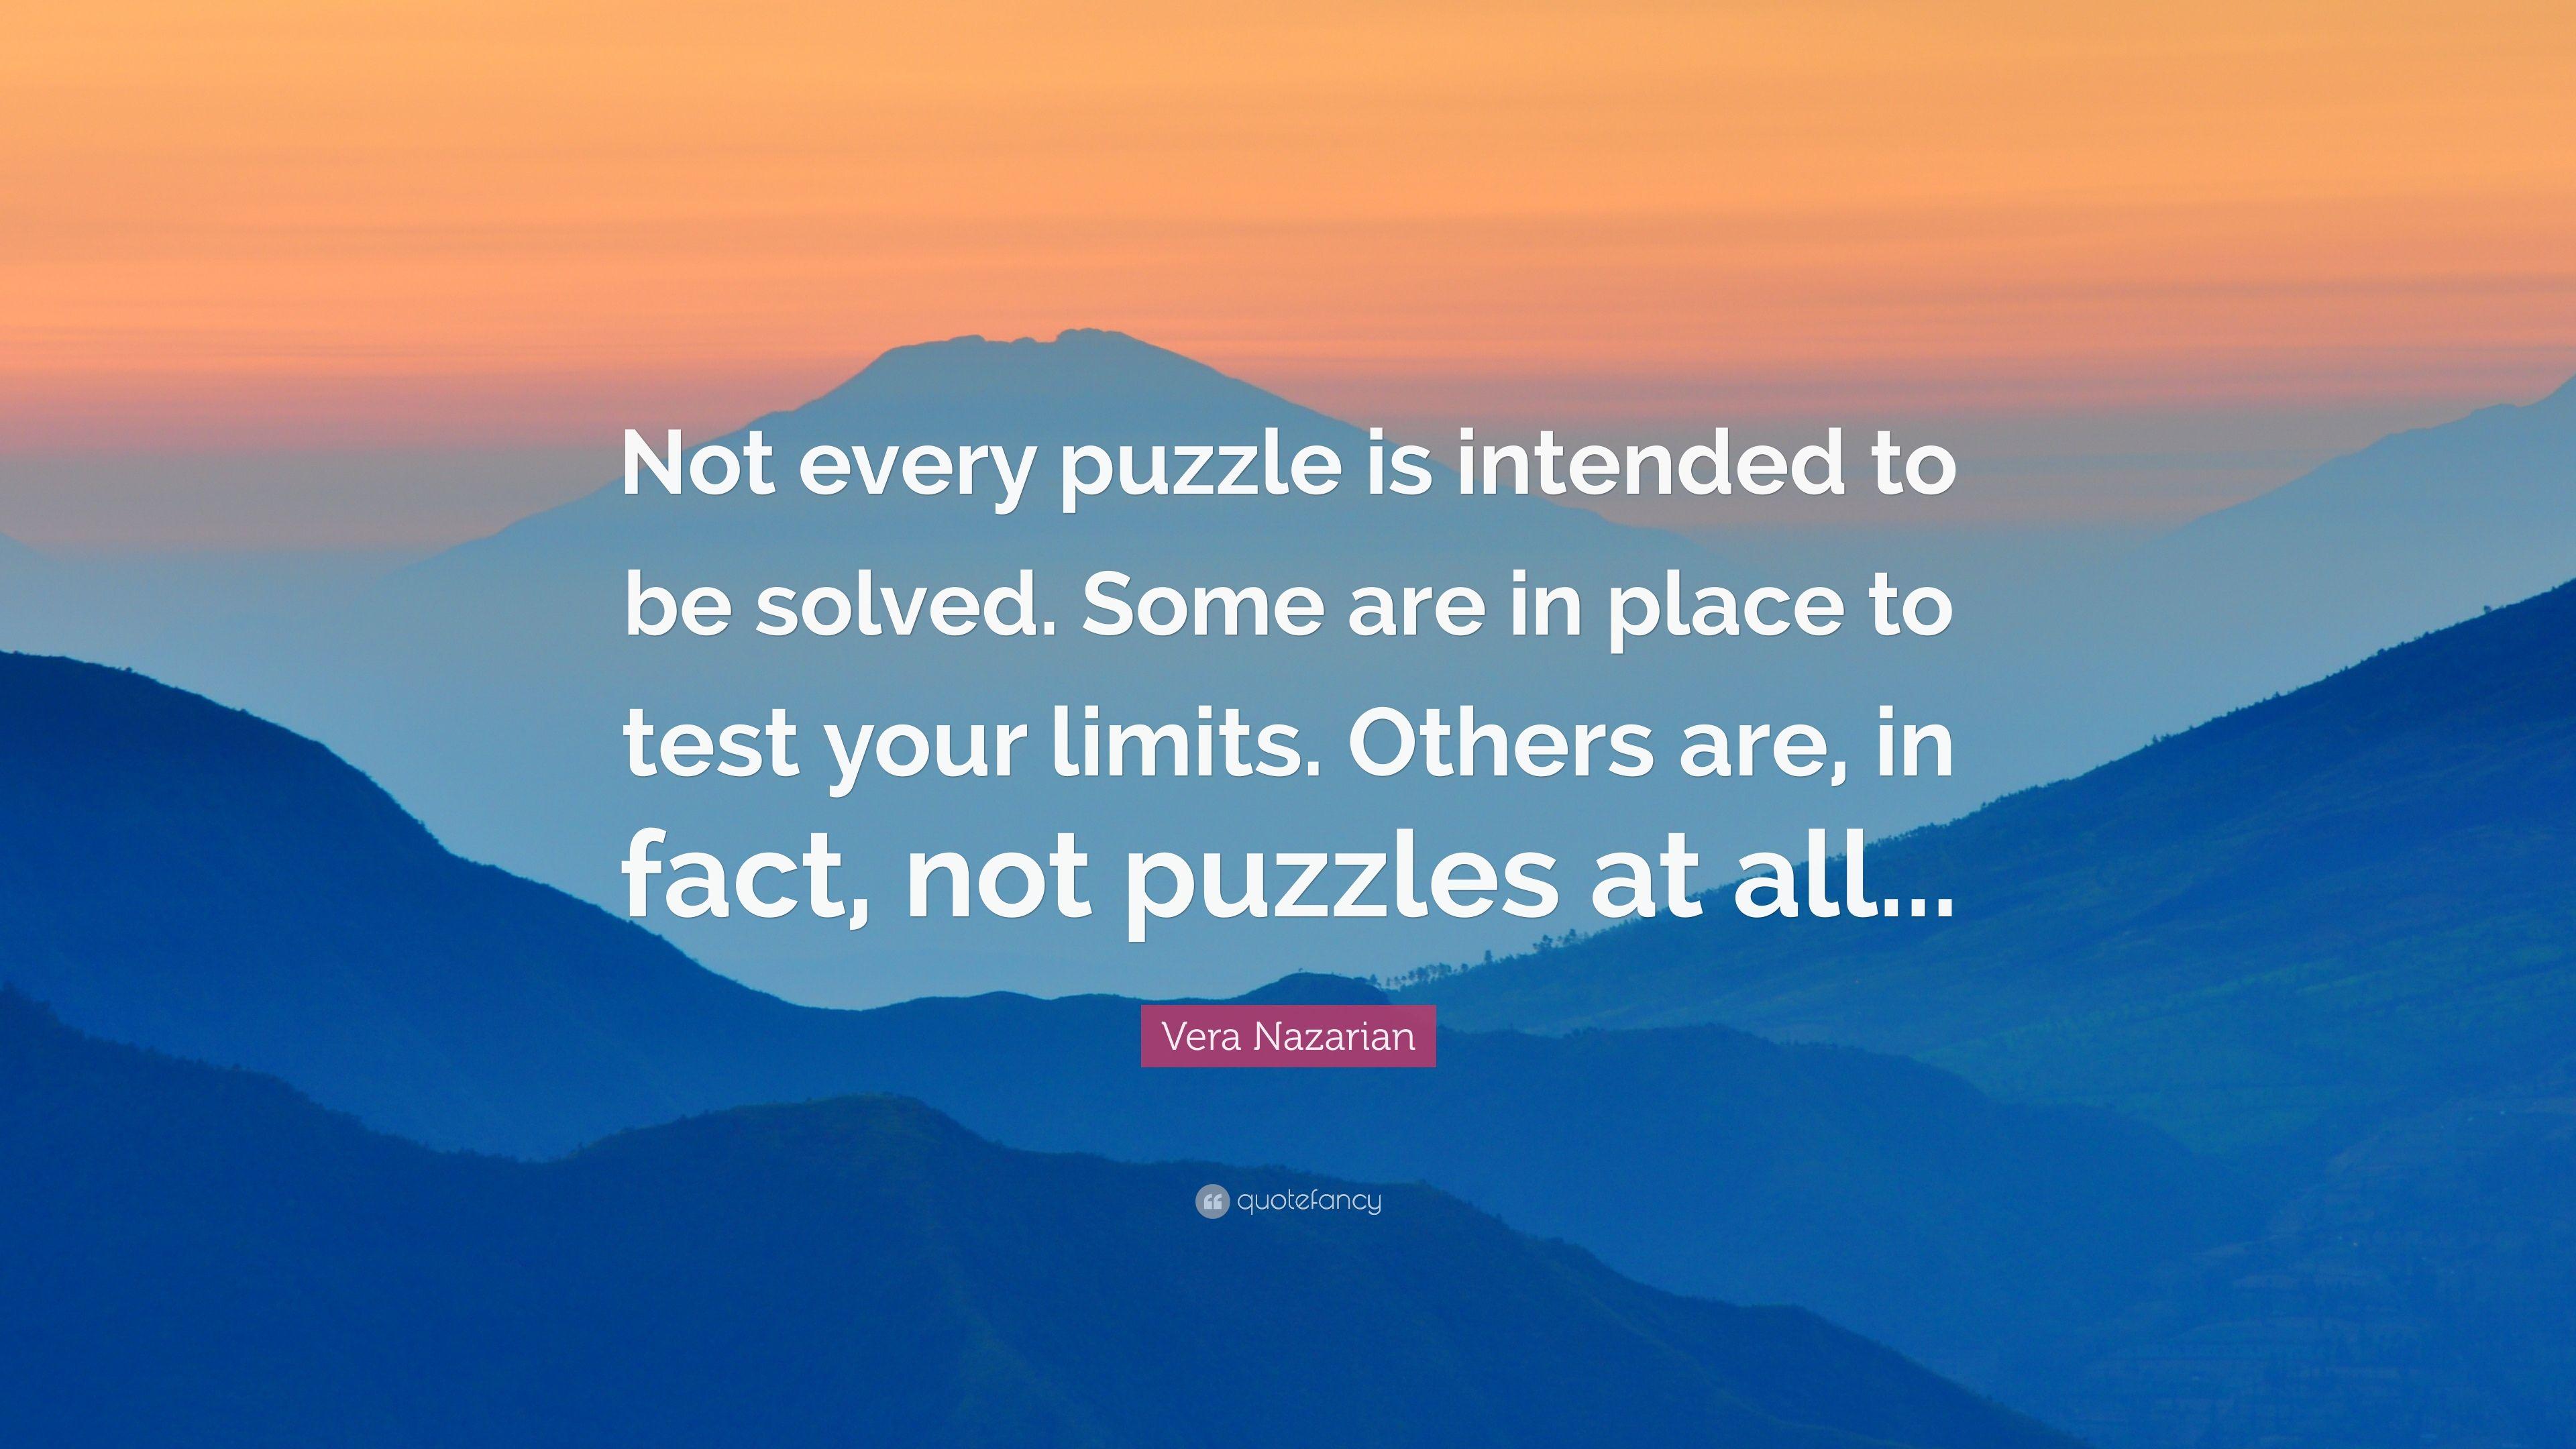 Vera Nazarian Quote: “Not every puzzle is intended to be solved